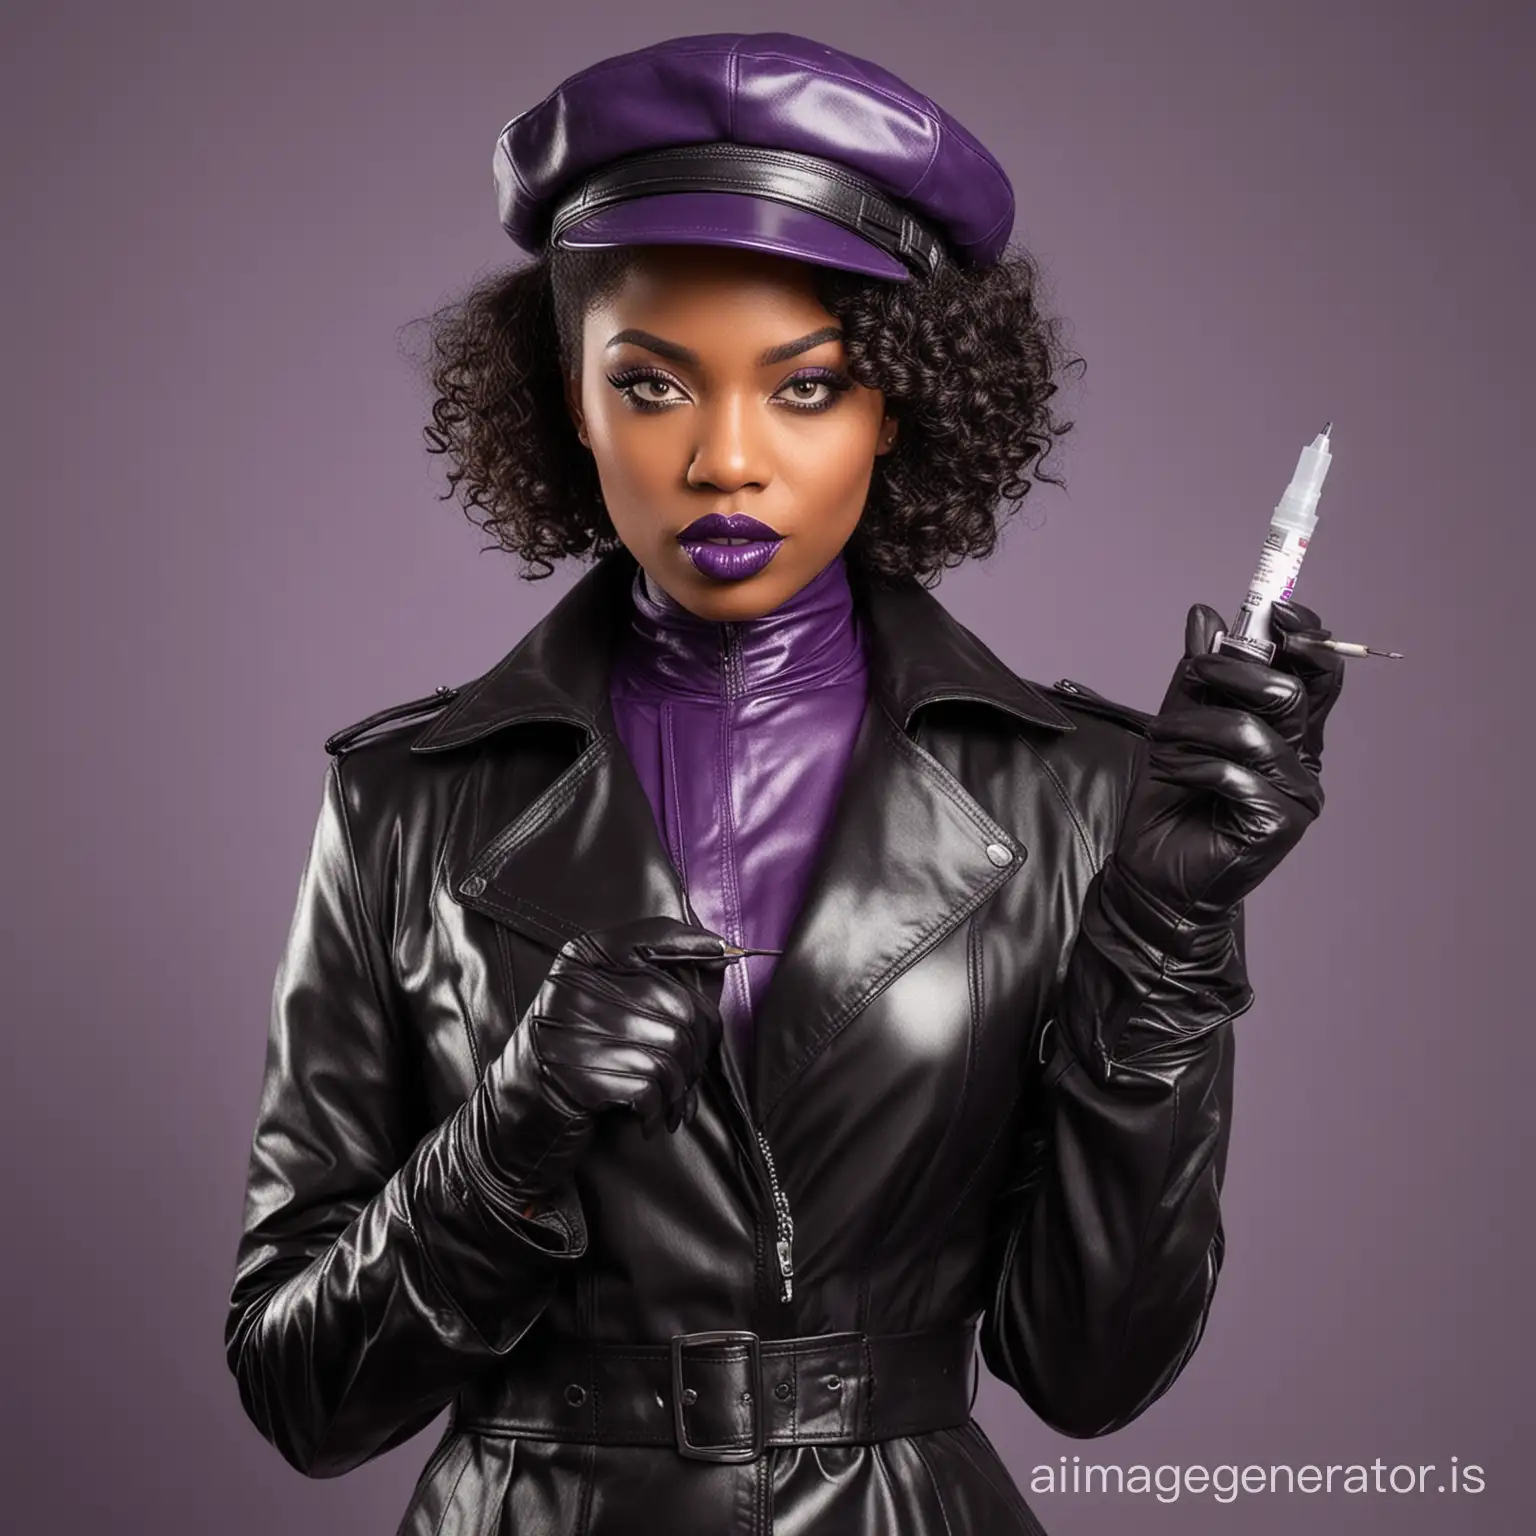 Mad-Scientist-Black-Woman-with-Syringe-and-Leather-Accessories